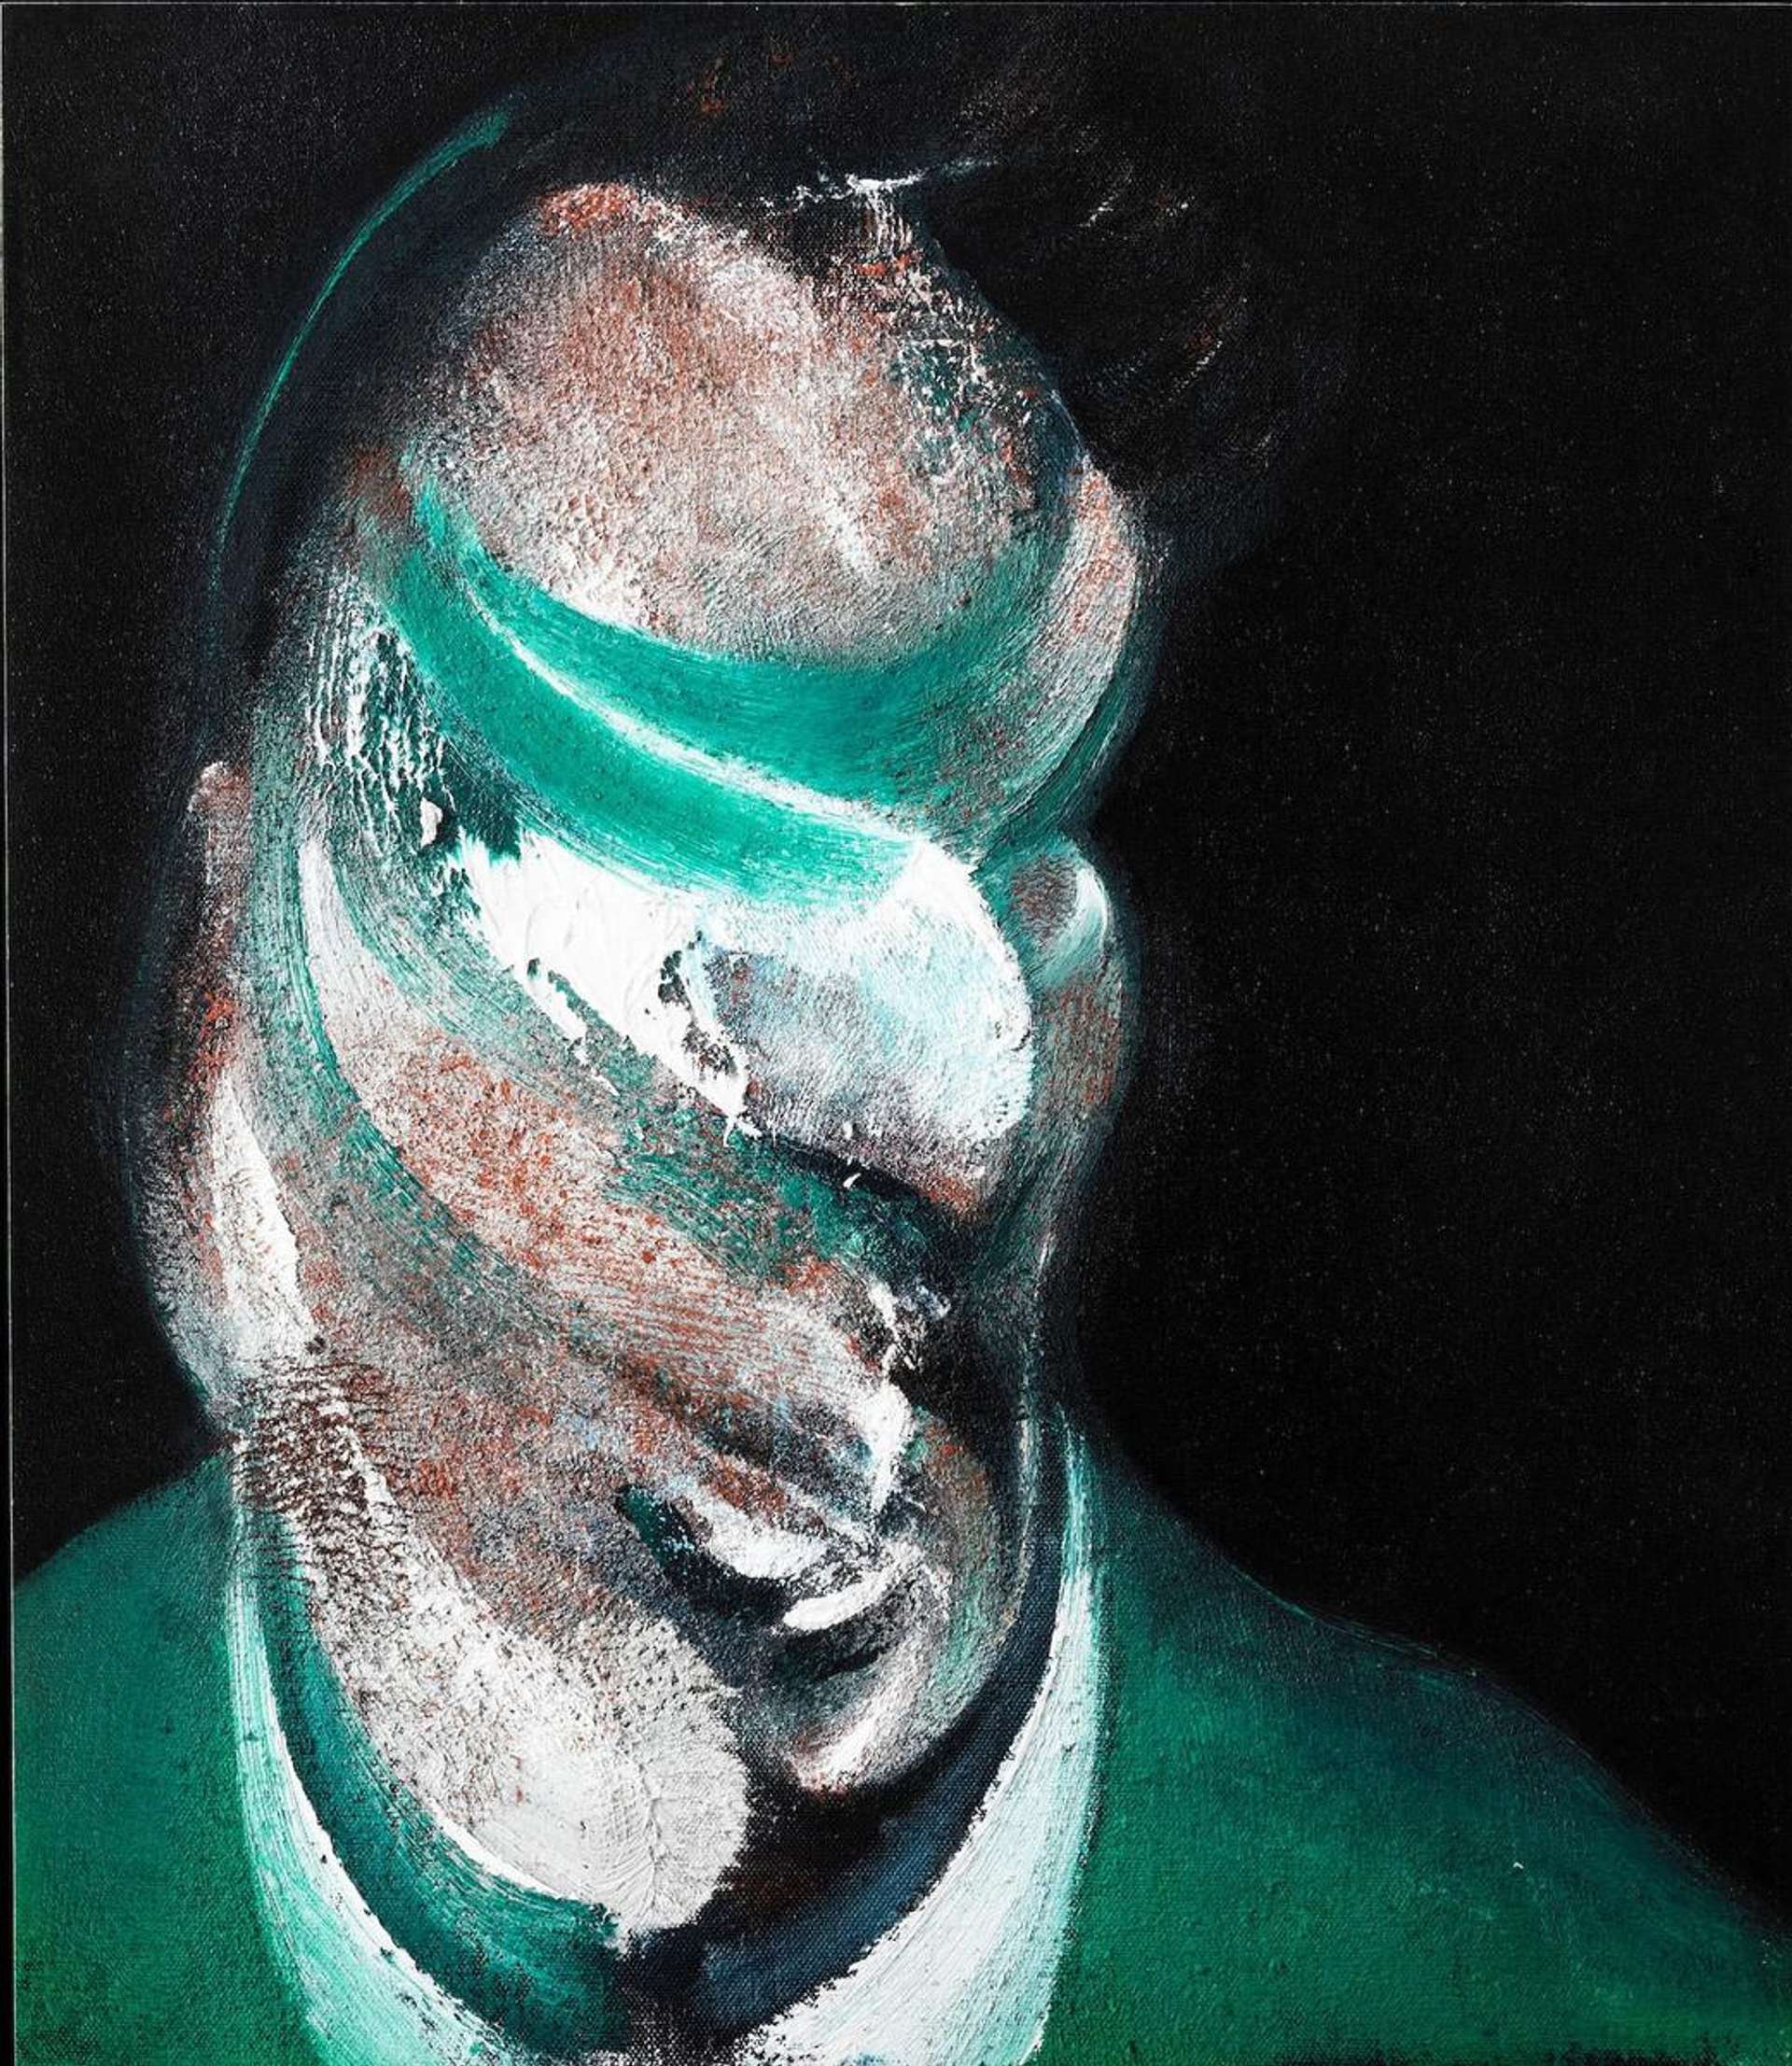 Blurred painting of a man’s face